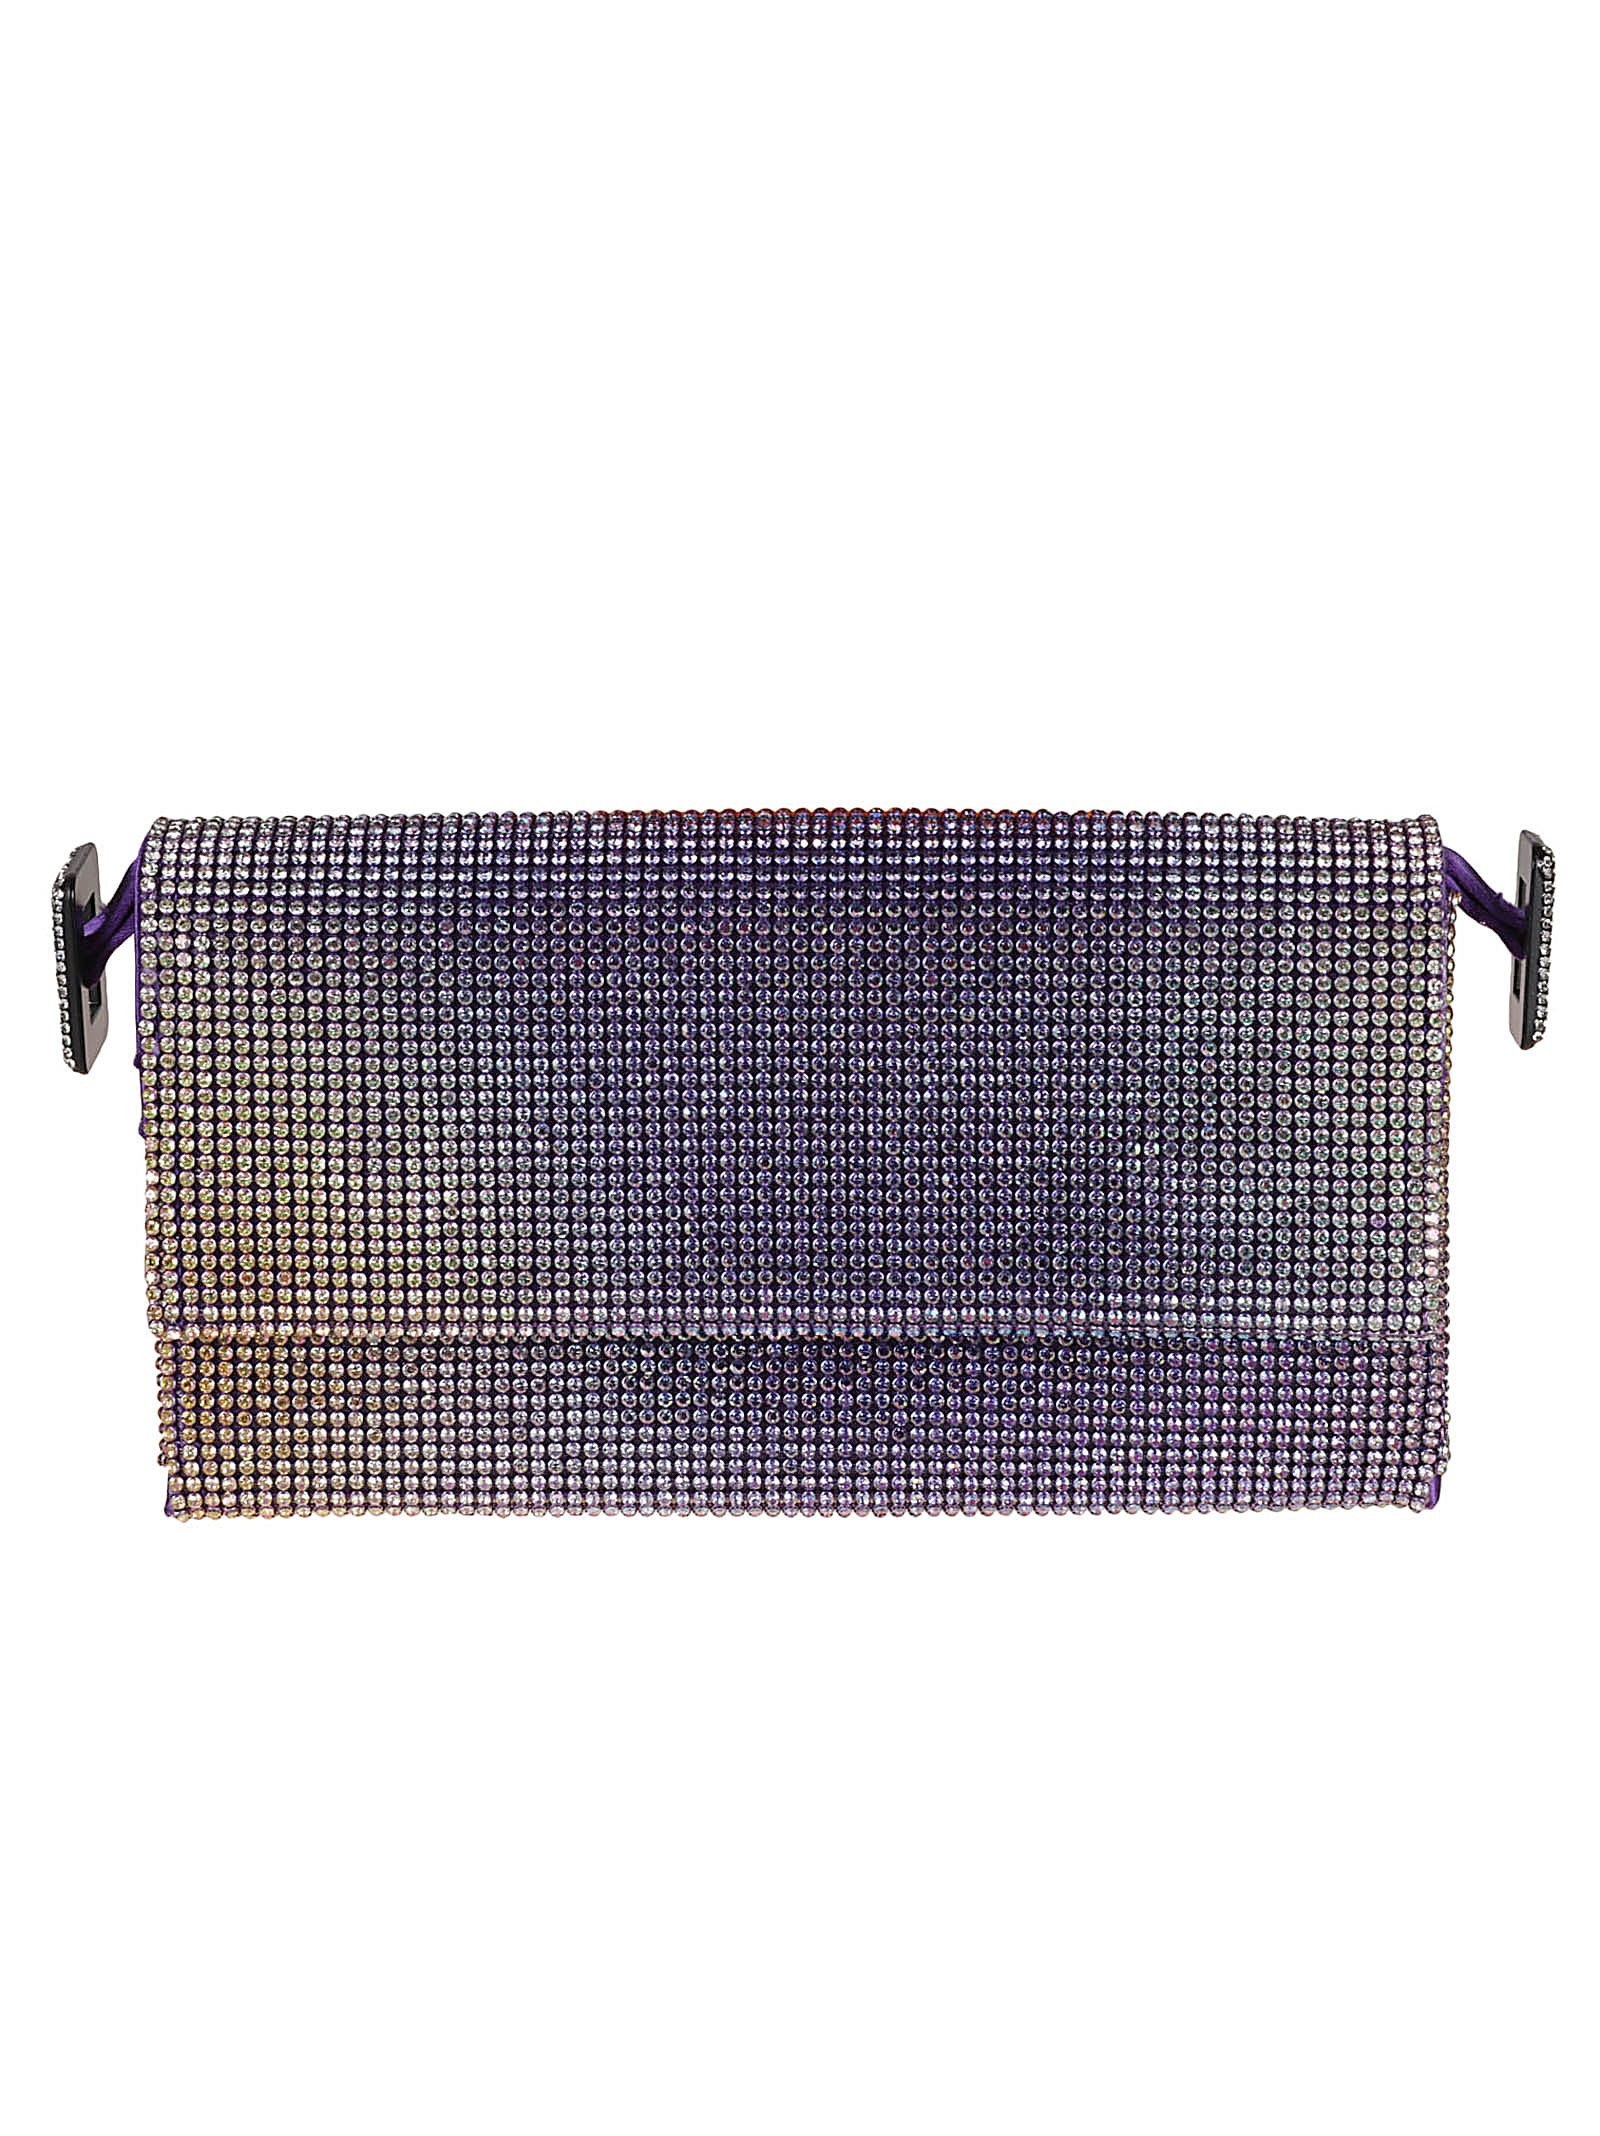 Shop Benedetta Bruzziches Embellished All-over Flap Shoulder Bag In The Living Daylight